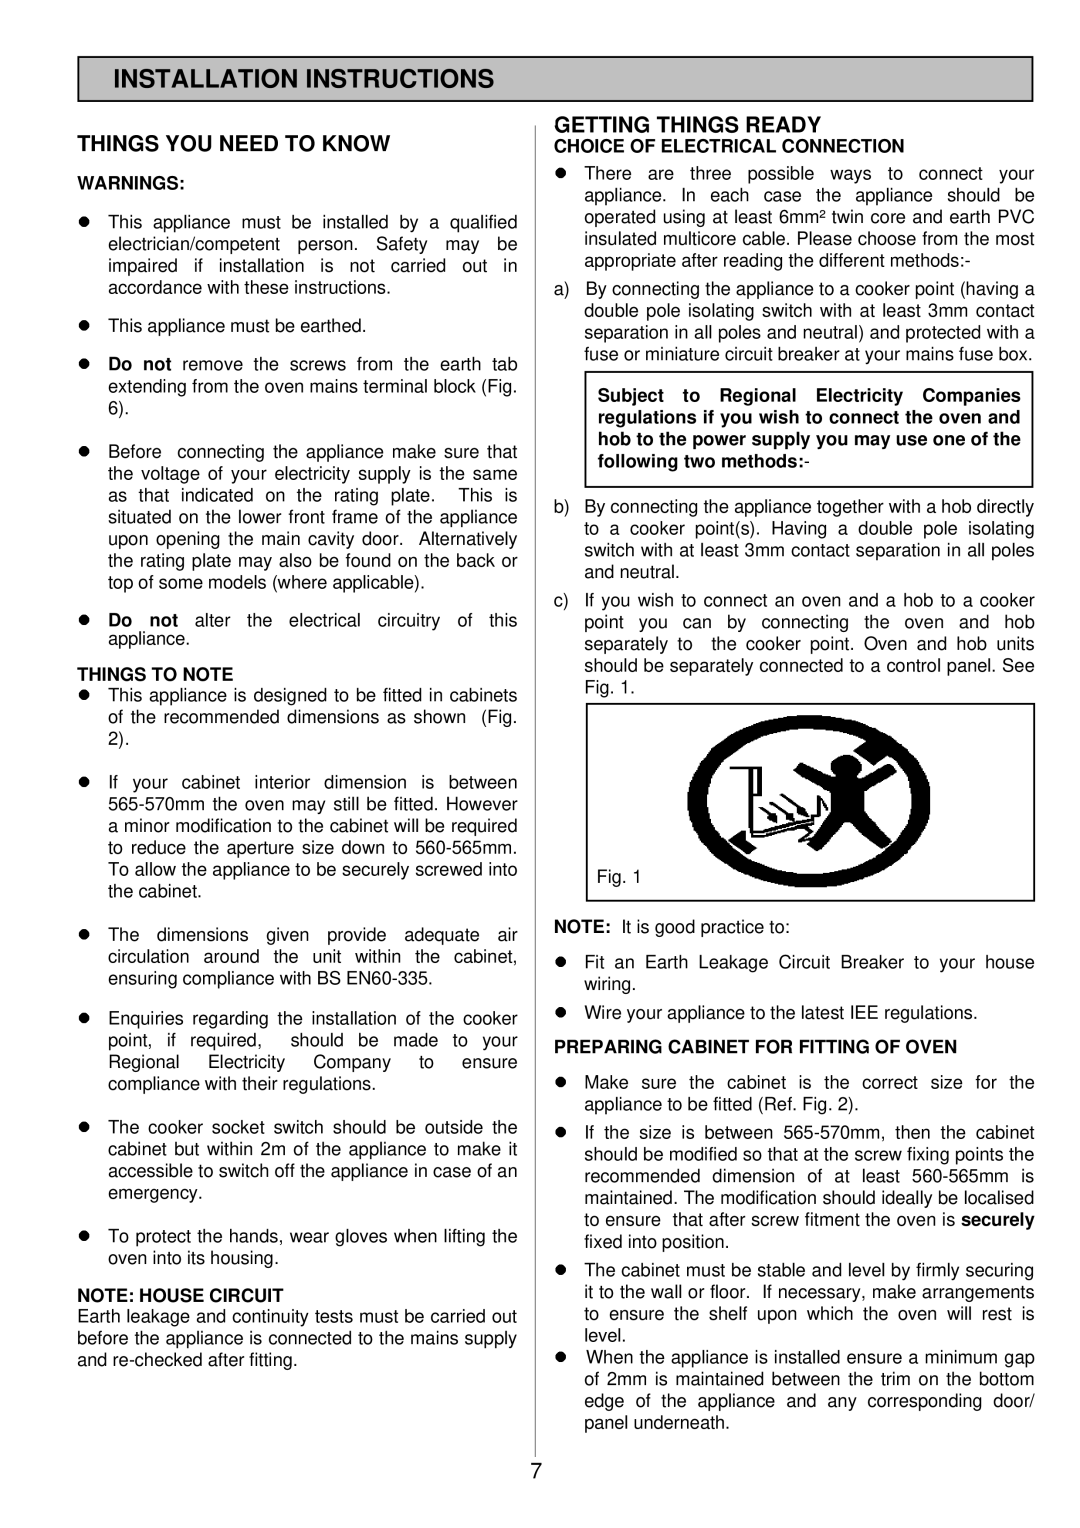 Electrolux 985 manual Installation Instructions, Things YOU Need to Know, Getting Things Ready, Things to Note 